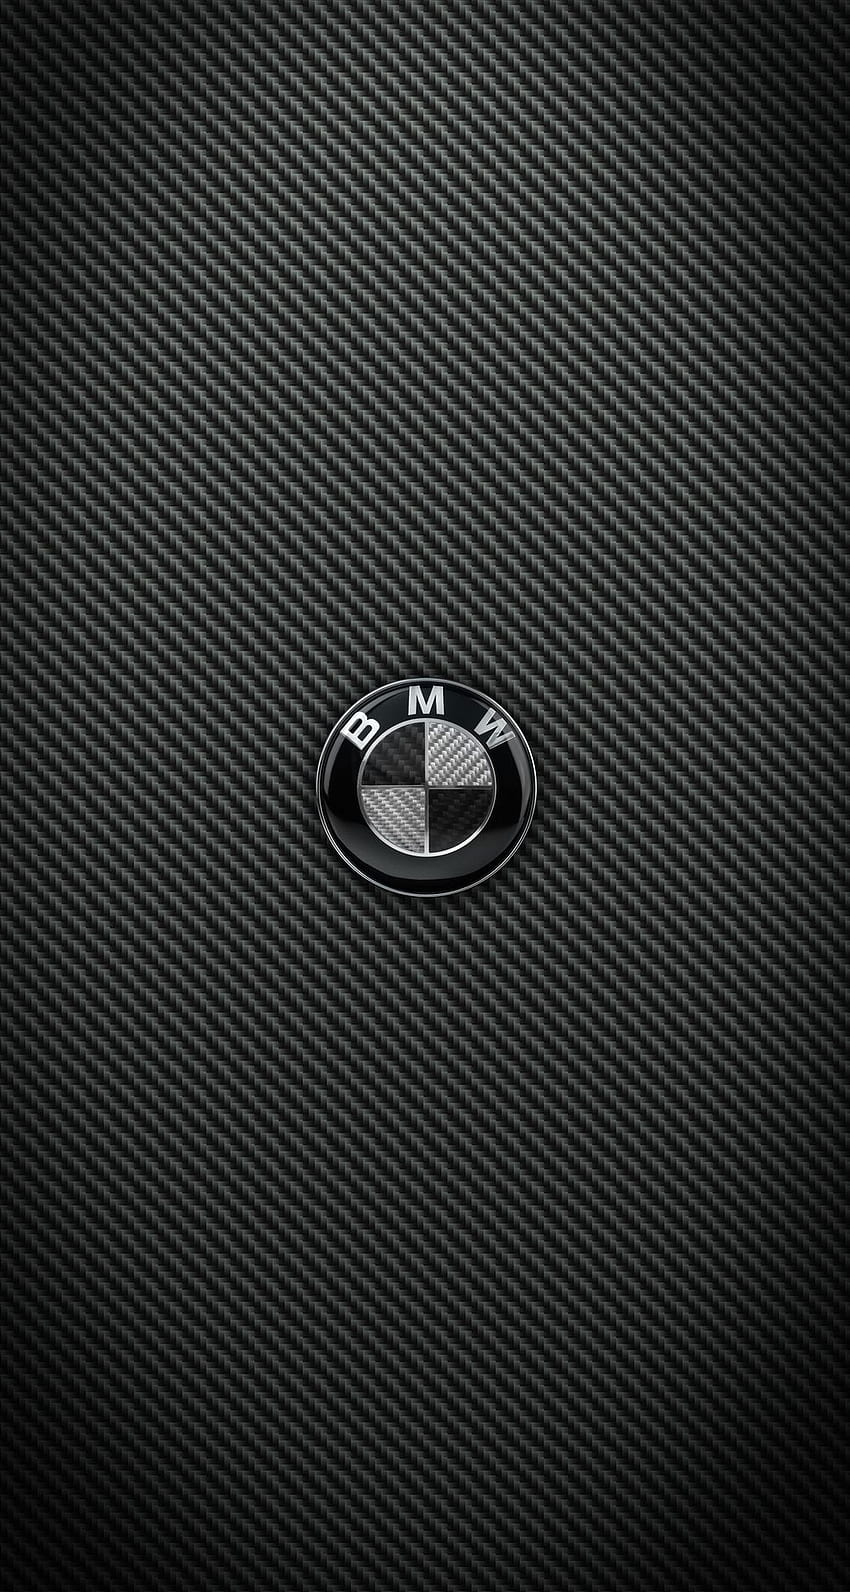 Carbon Fiber BMW and M Power iPhone for iPhone 6 Plus HD phone wallpaper